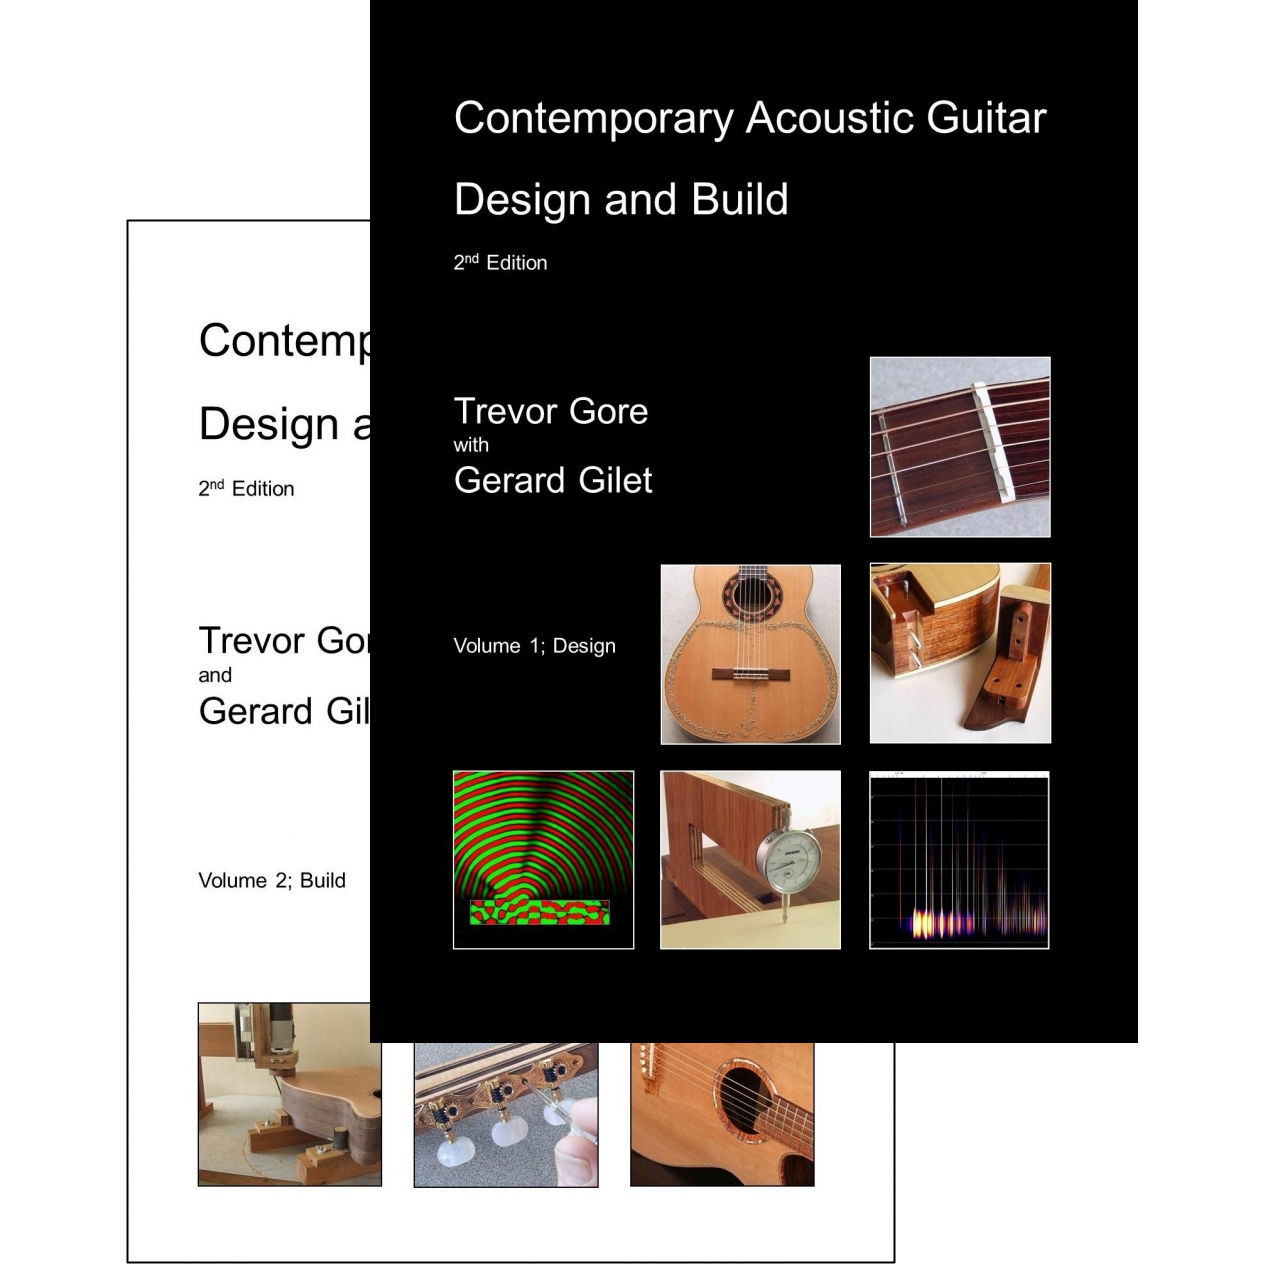 Custom Guitars. Contemporary Acoustic Guitar Design and Build volume 1 and 2 covers